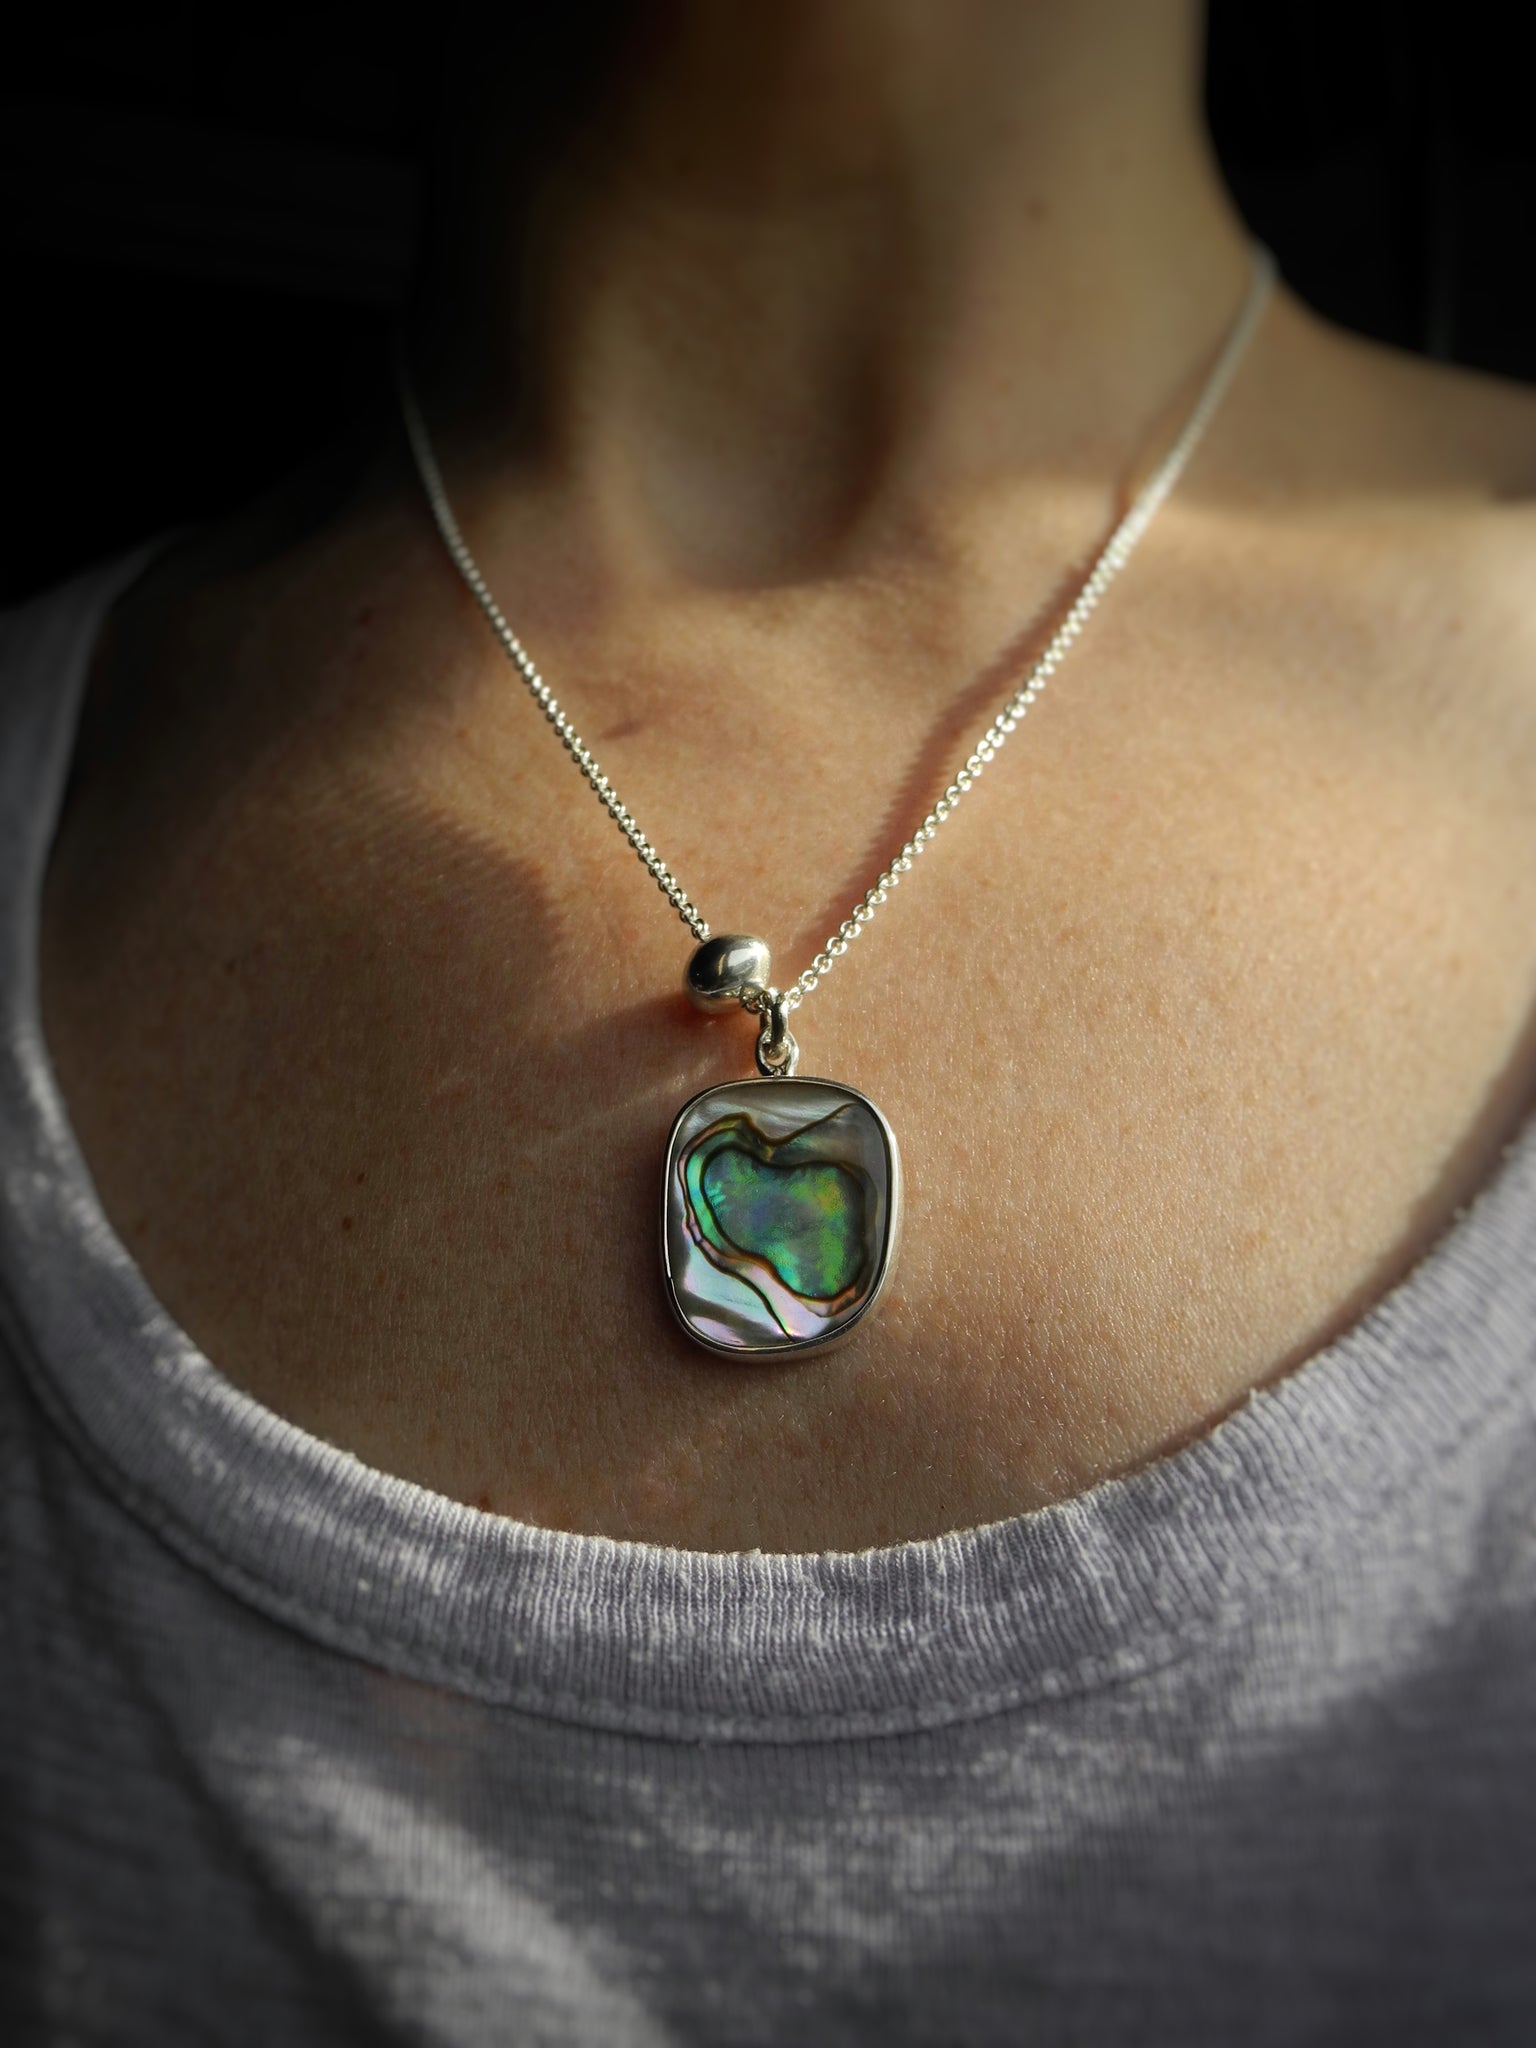 Receptive Energy, Sister Necklace